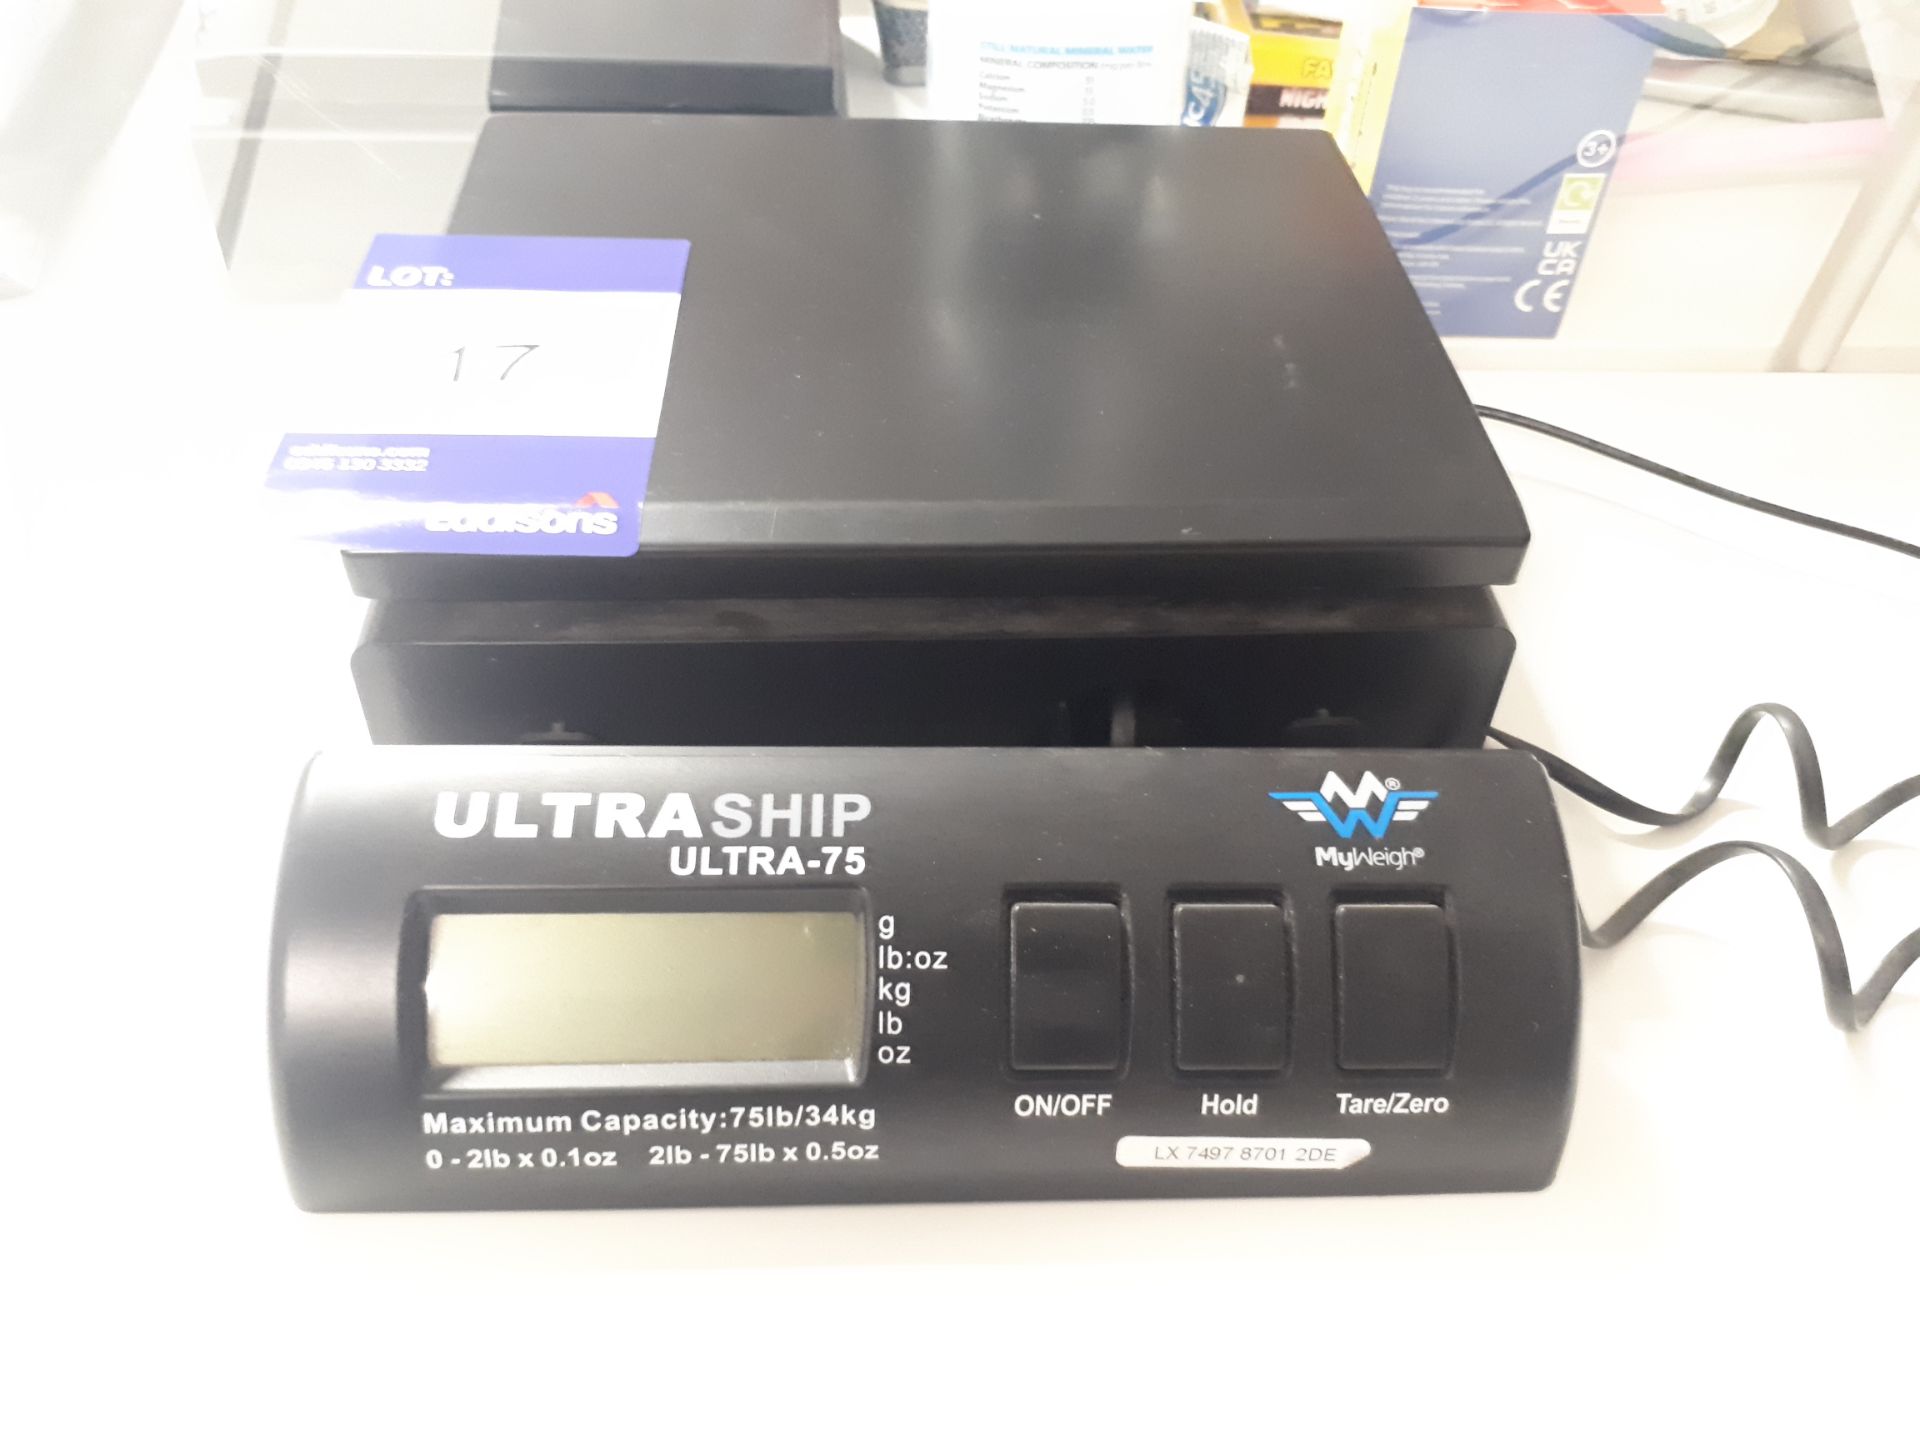 UltraShip Ultra-75 weighing scales, 34KG capacity - Image 2 of 2